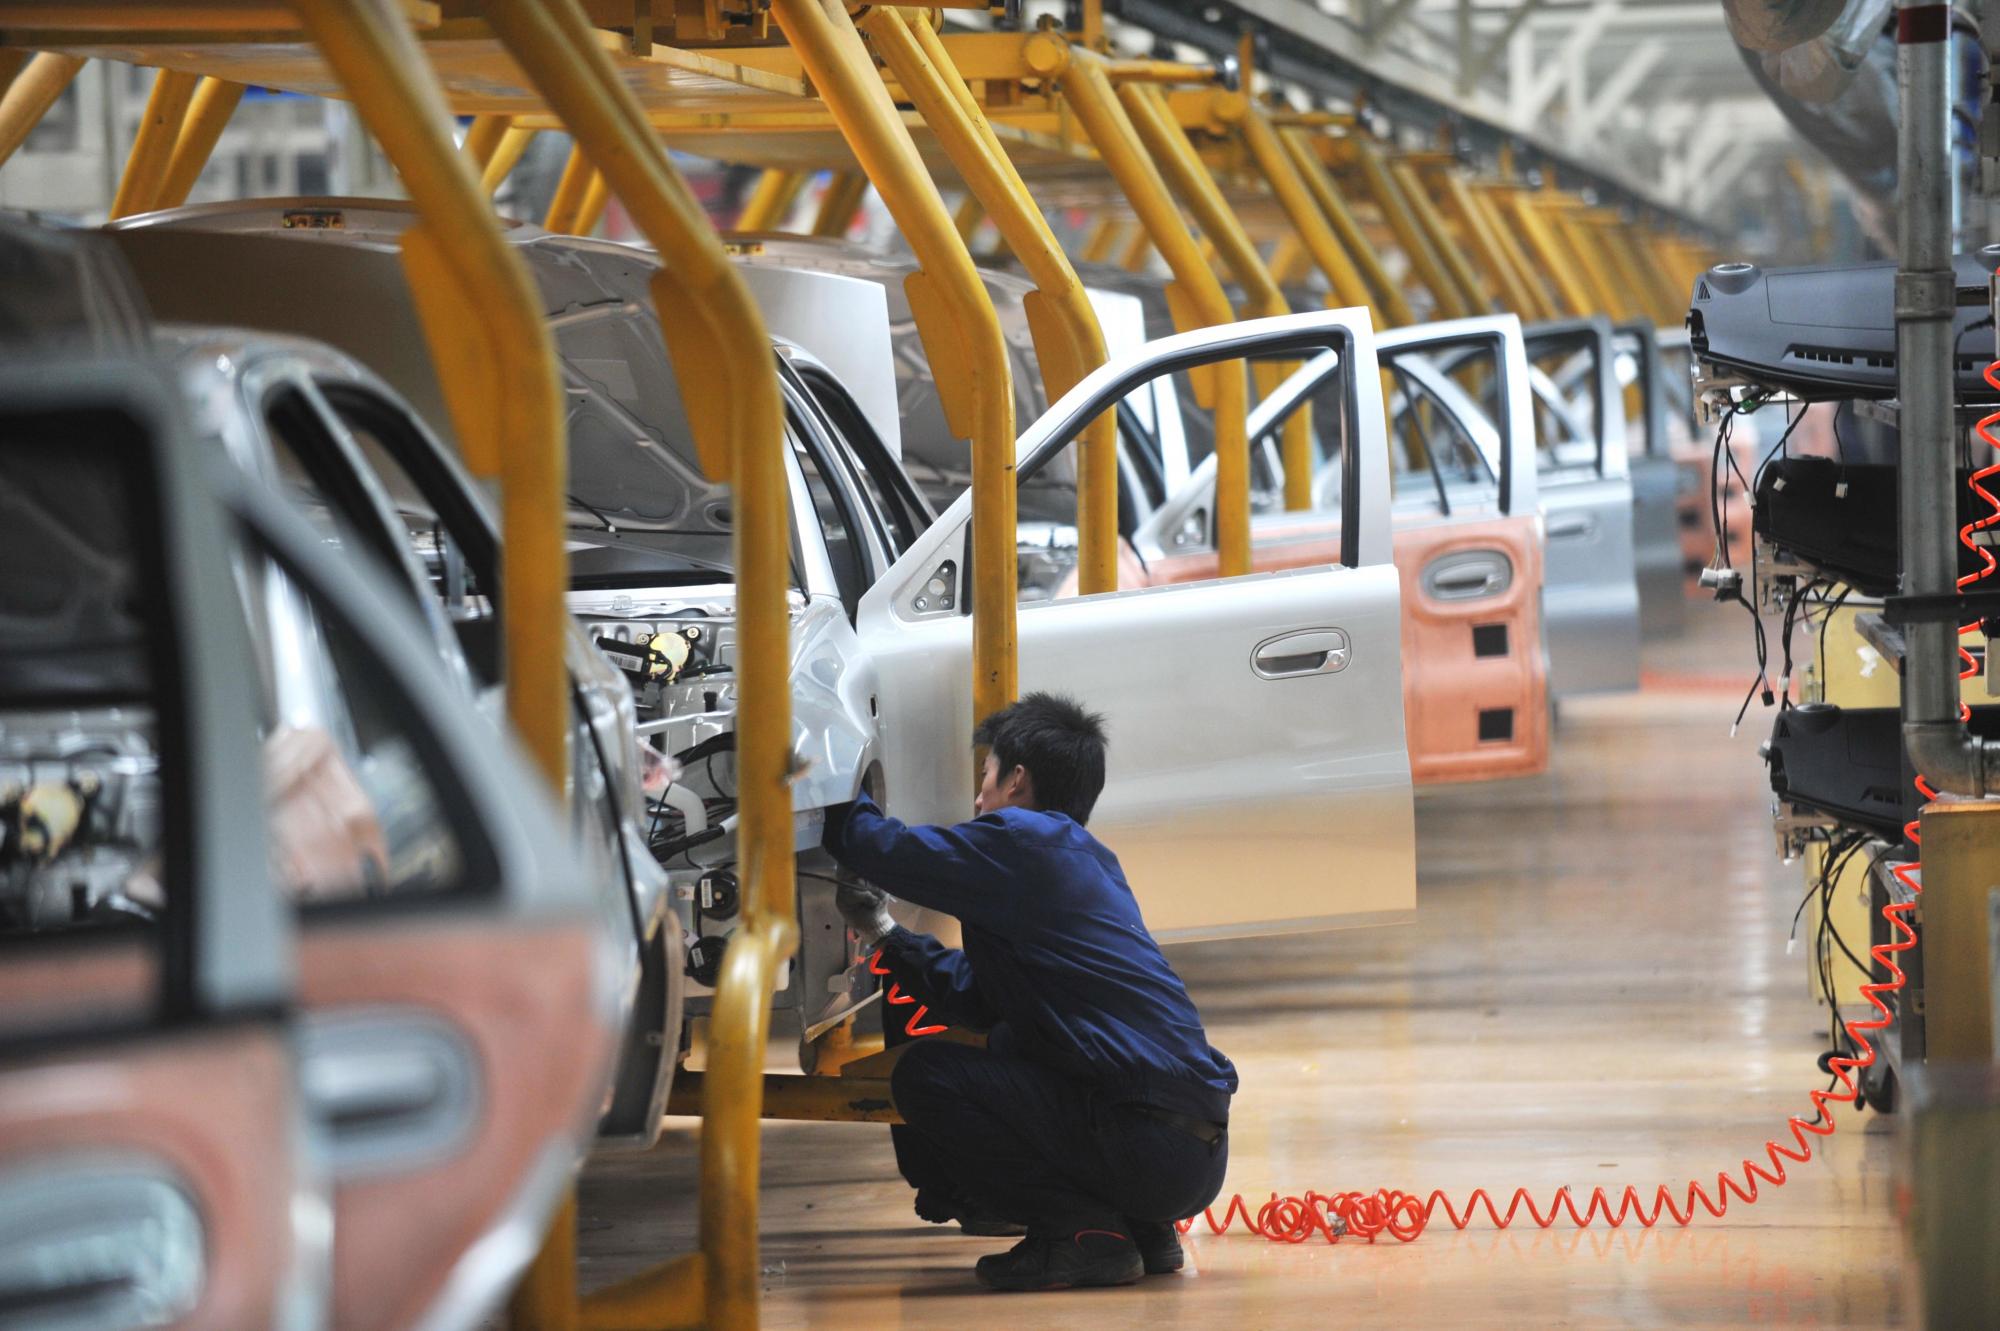 Geely sets its sights on Zhongyu